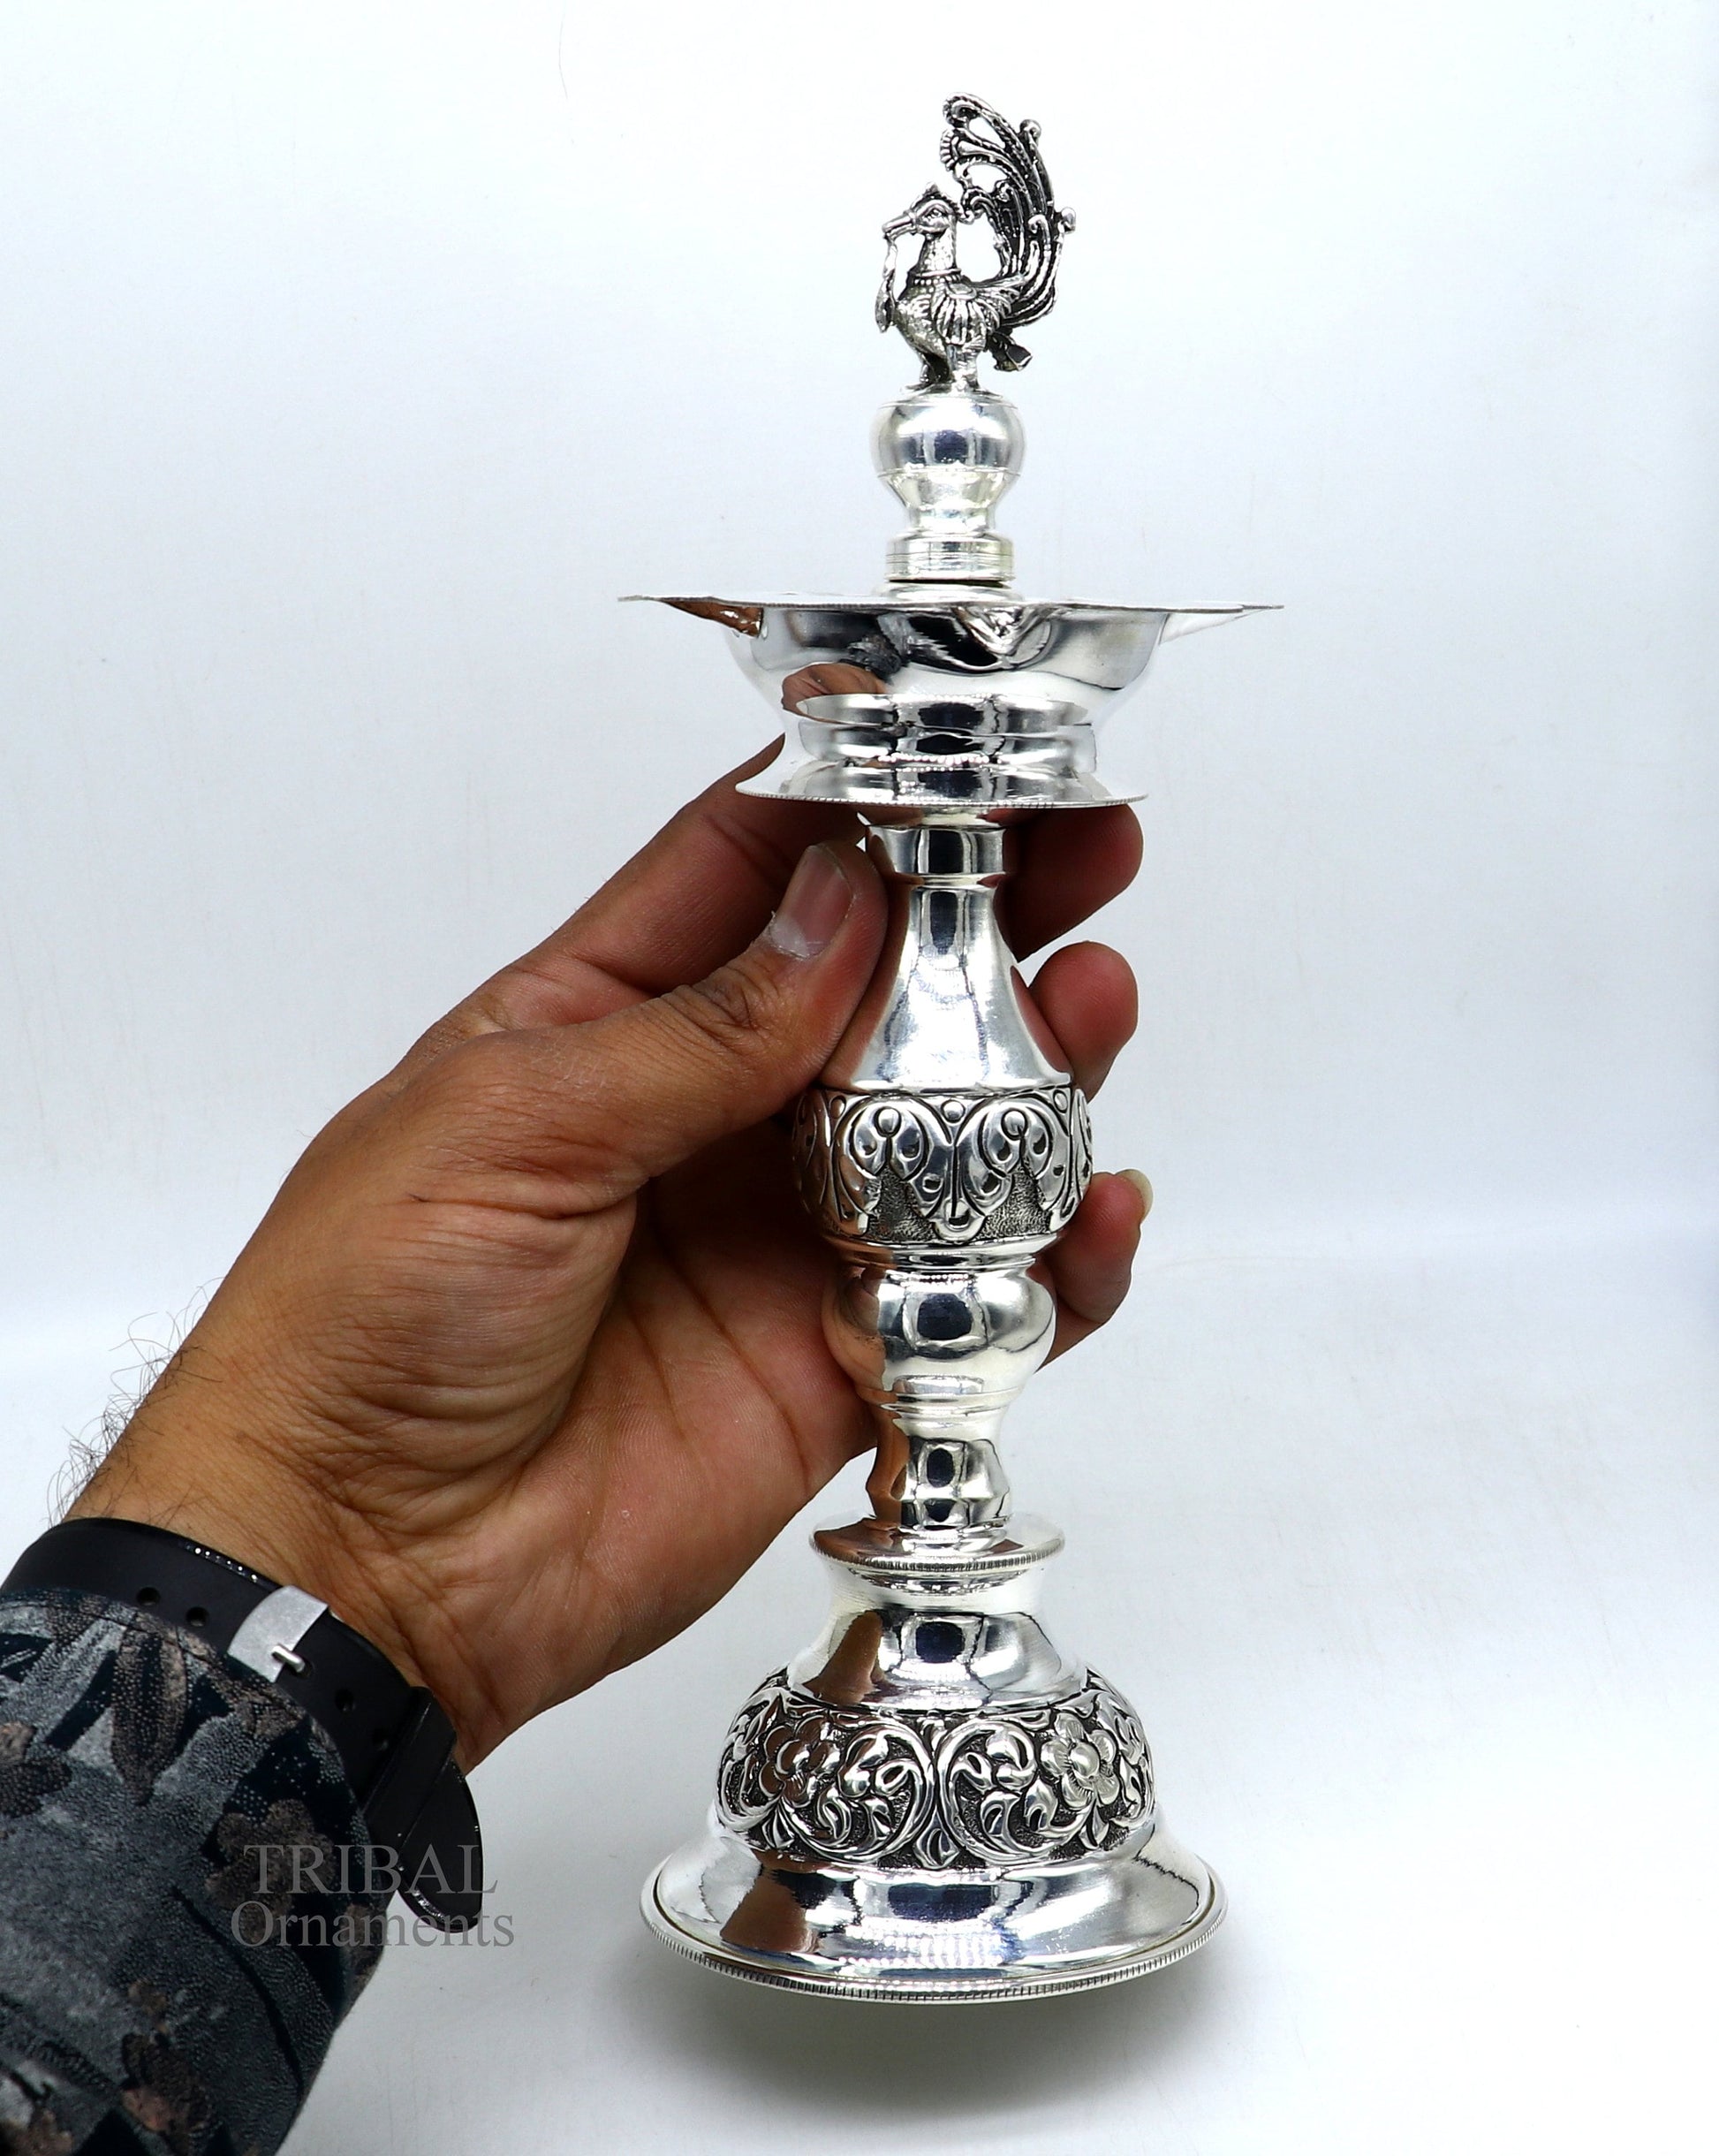 10" 925 sterling silver handcrafted vintage design fave face oil lamp, Deepak, silver puja article, silver candle stand diya figurine LMP01 - TRIBAL ORNAMENTS